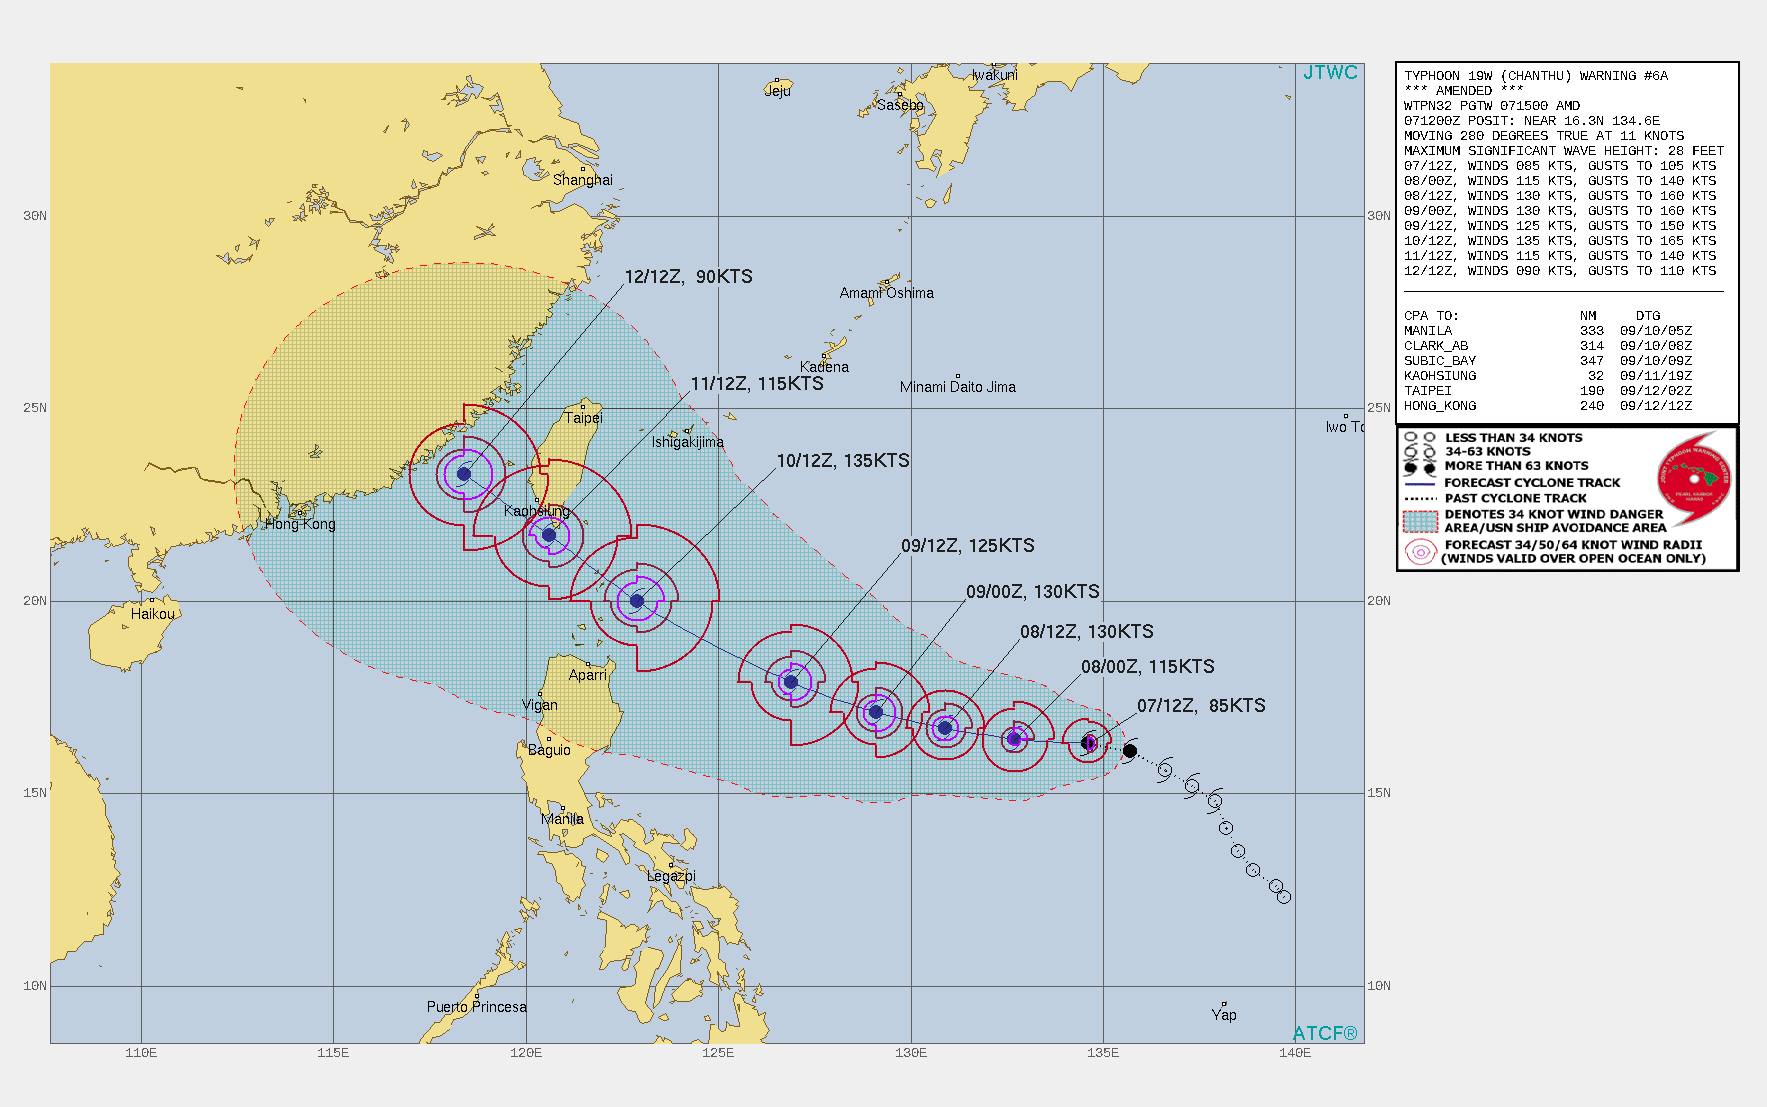 TY 19W(CHANTHU). WARNING 6 WAS ISSUED AND AMENDED AT 07/15UTC. AT 12UTC THE INITIAL ESTIMATE WAS 70KNOTS AND WAS RAISED TO 85KNOTS WITH THE AMENDED WARNING. THE FORECAST WAS CALLING FOR 115KNOTS AT 08/00UTC. THE ACTUAL RATE OF INTENSIFICATION HAS EXCEEDED THE FORECAST.